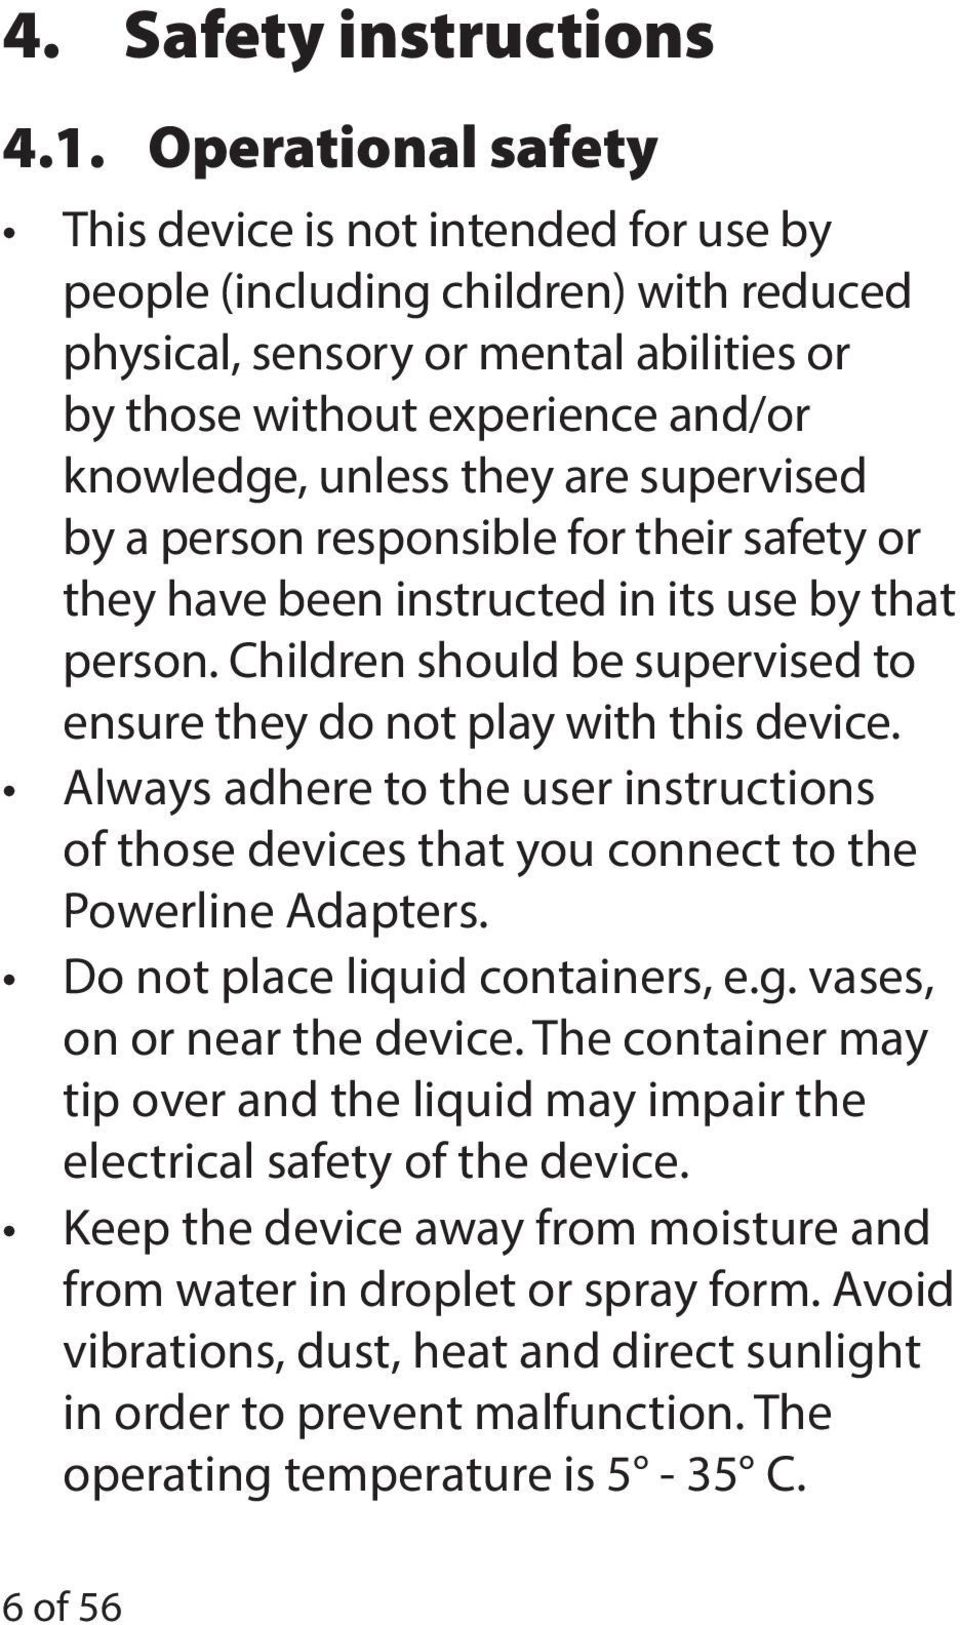 are supervised by a person responsible for their safety or they have been instructed in its use by that person. Children should be supervised to ensure they do not play with this device.